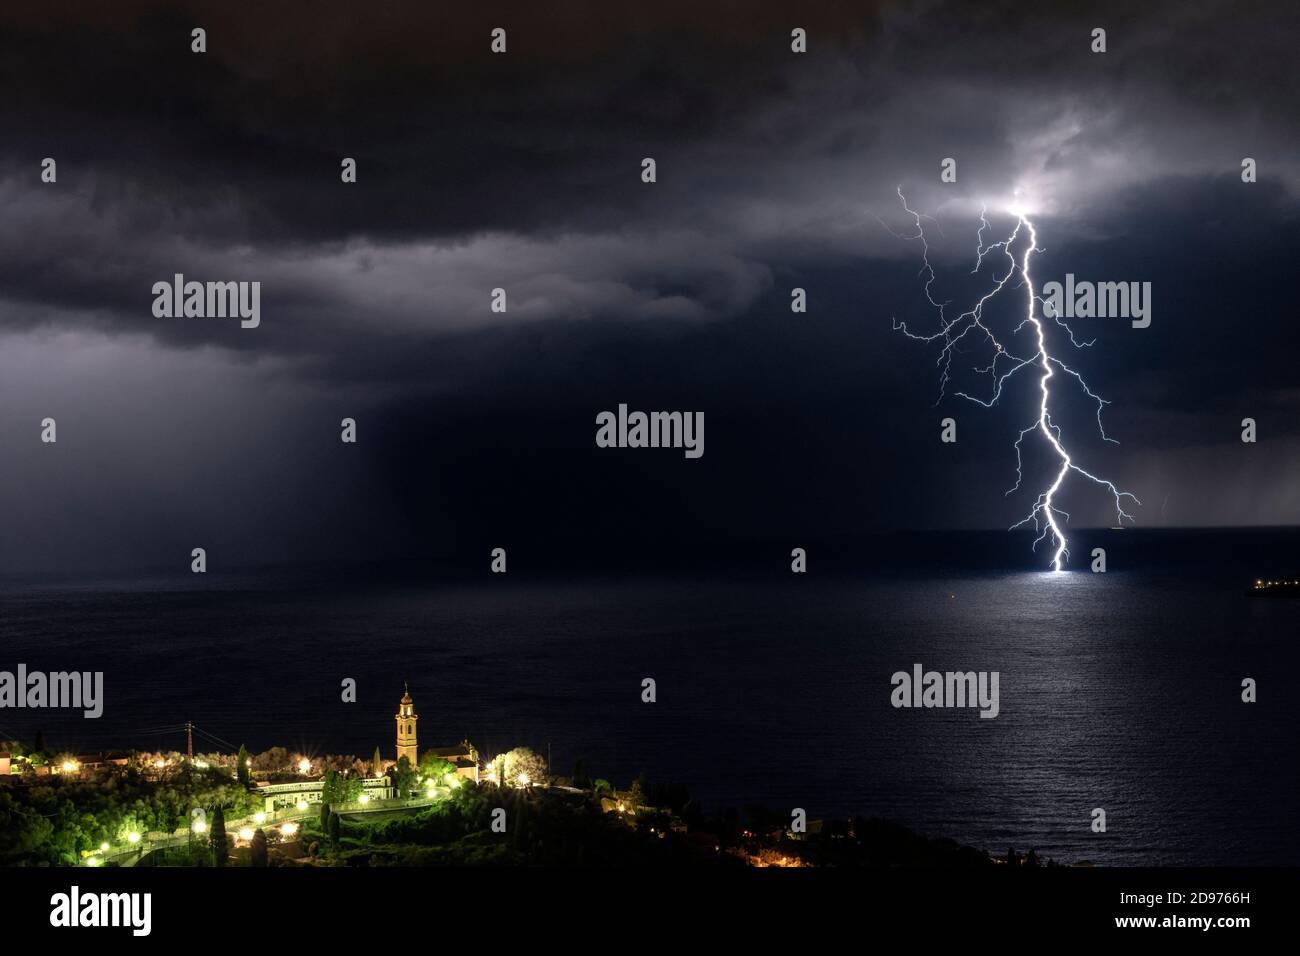 Branched lightning and church in front of Rapallo and near Portofino in Liguria, Italy, during the storm of September 1st. Stock Photo